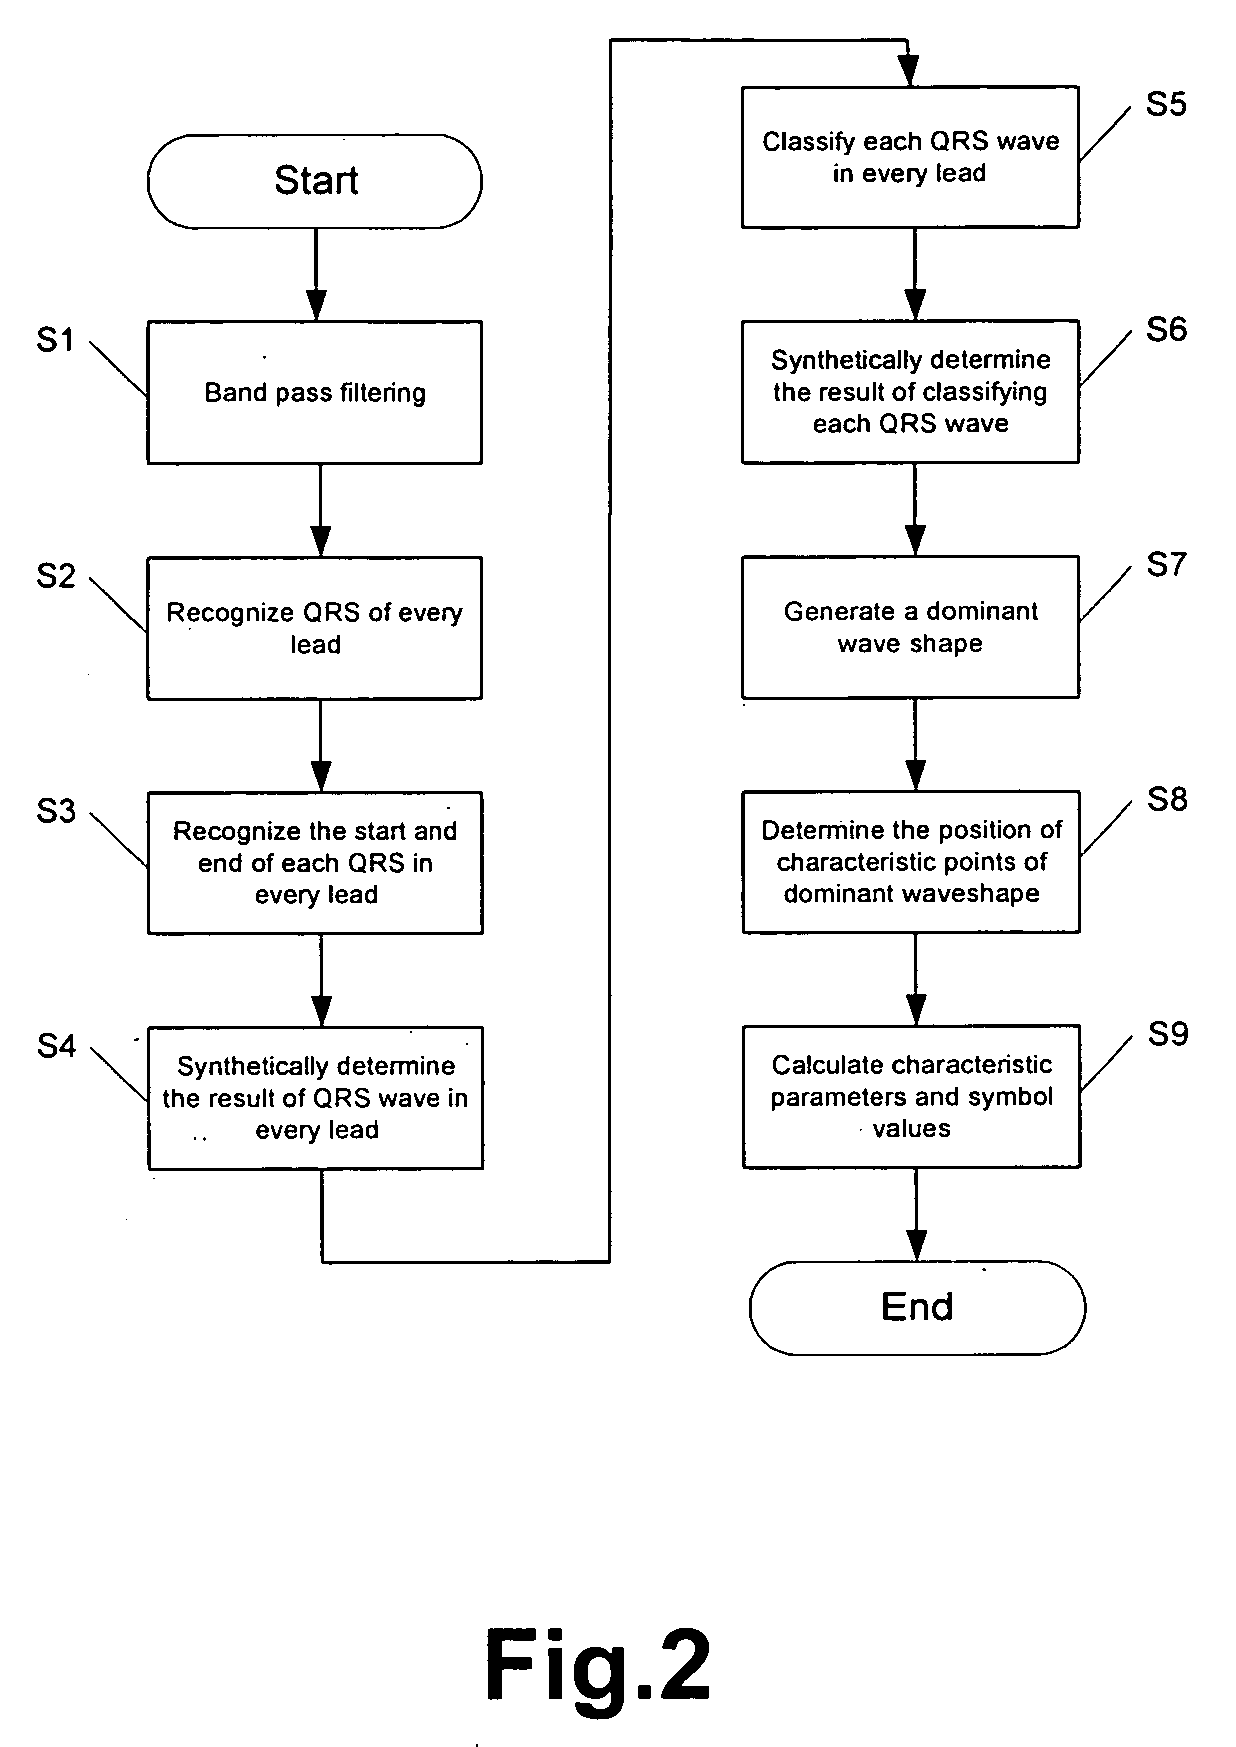 Computer assisted cardiogram diagnostic system and the method thereof